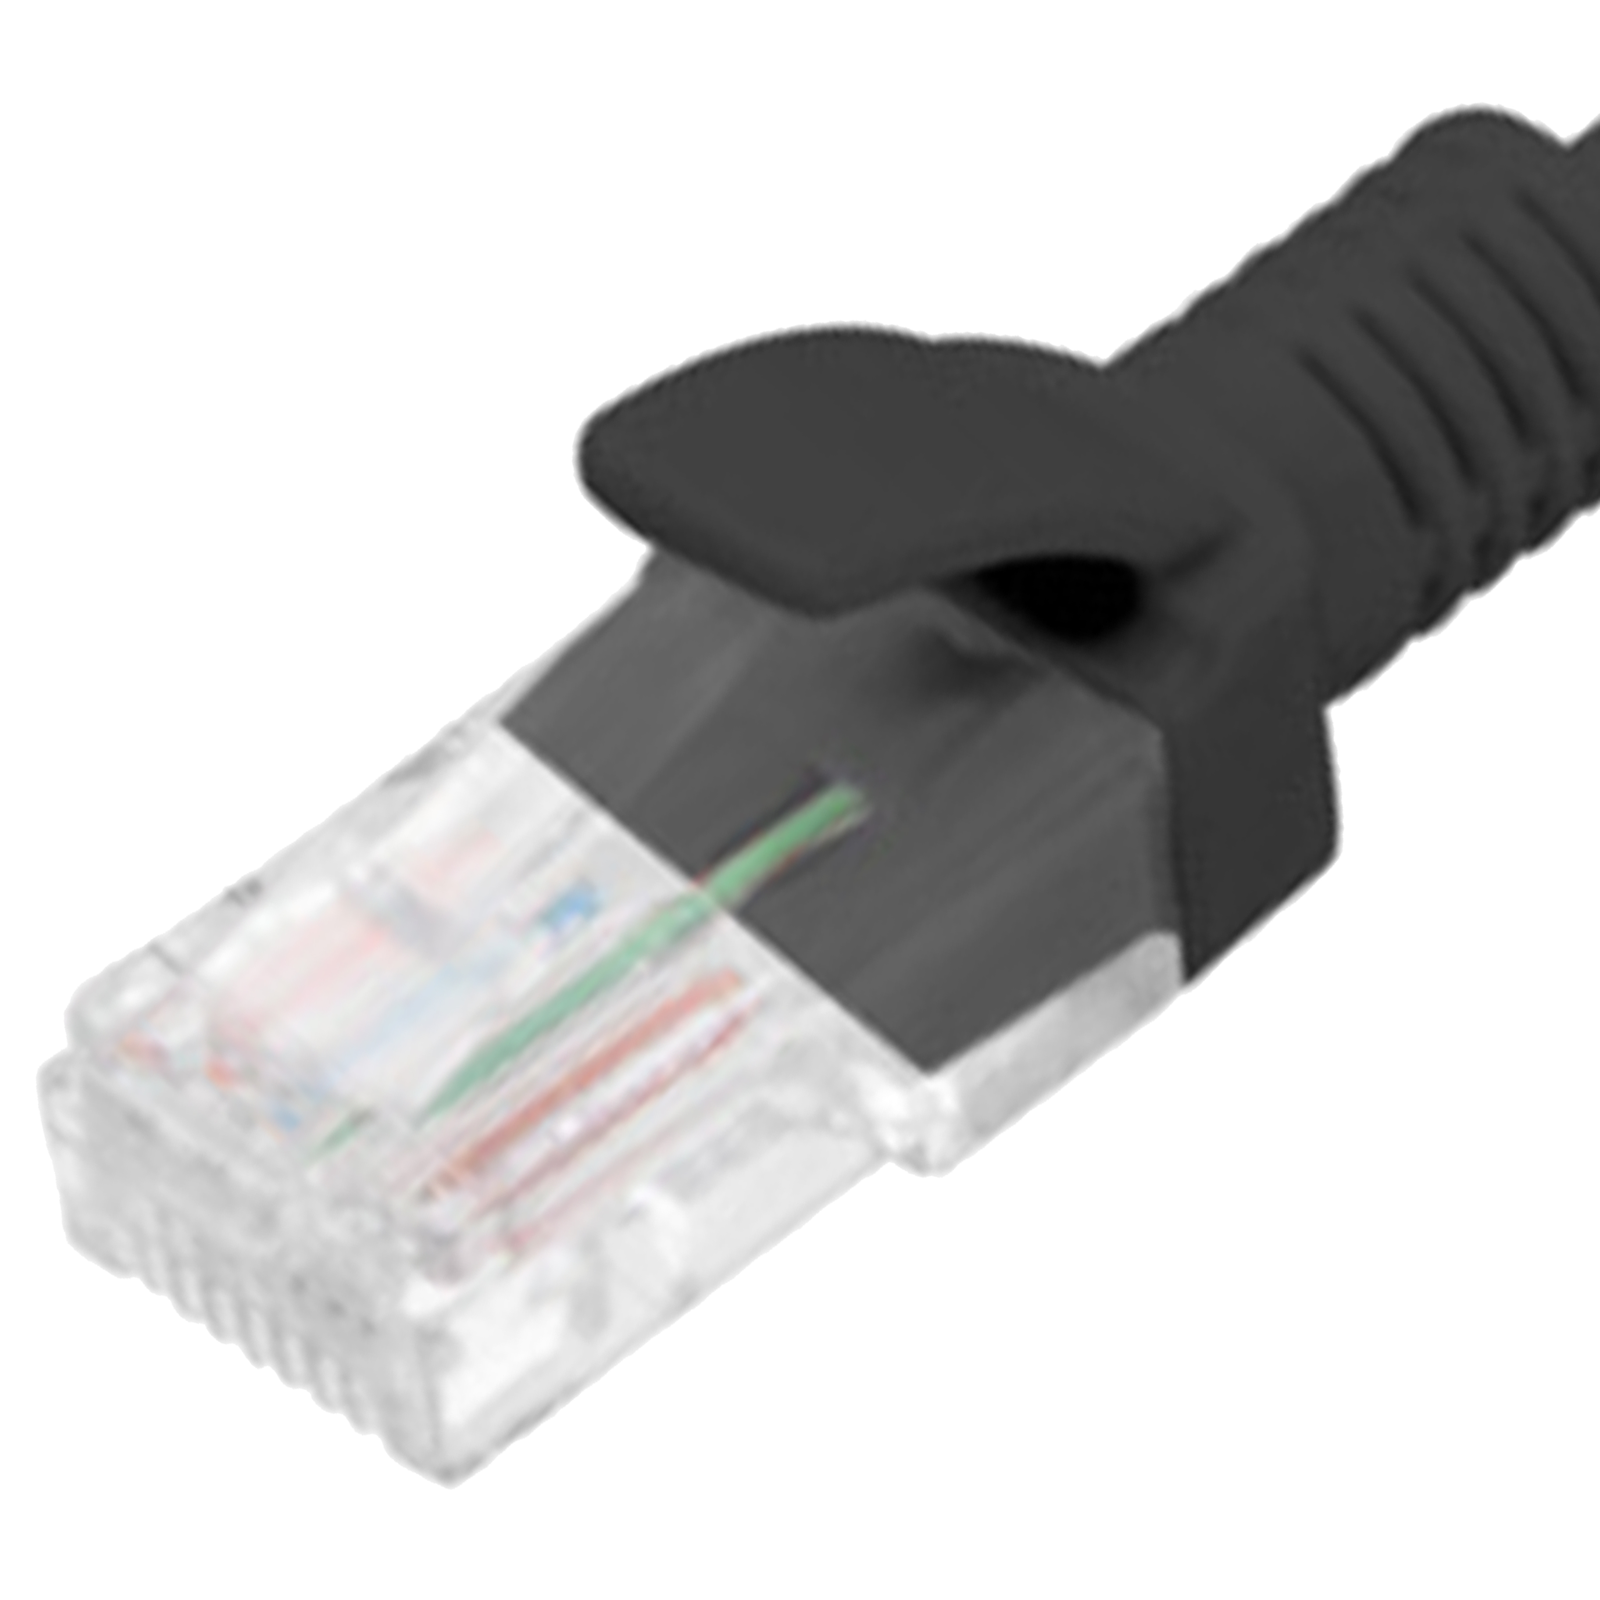 Ethernet network patch cable LAN UTP RJ45 Cat.6 gray 50cm - Cablematic